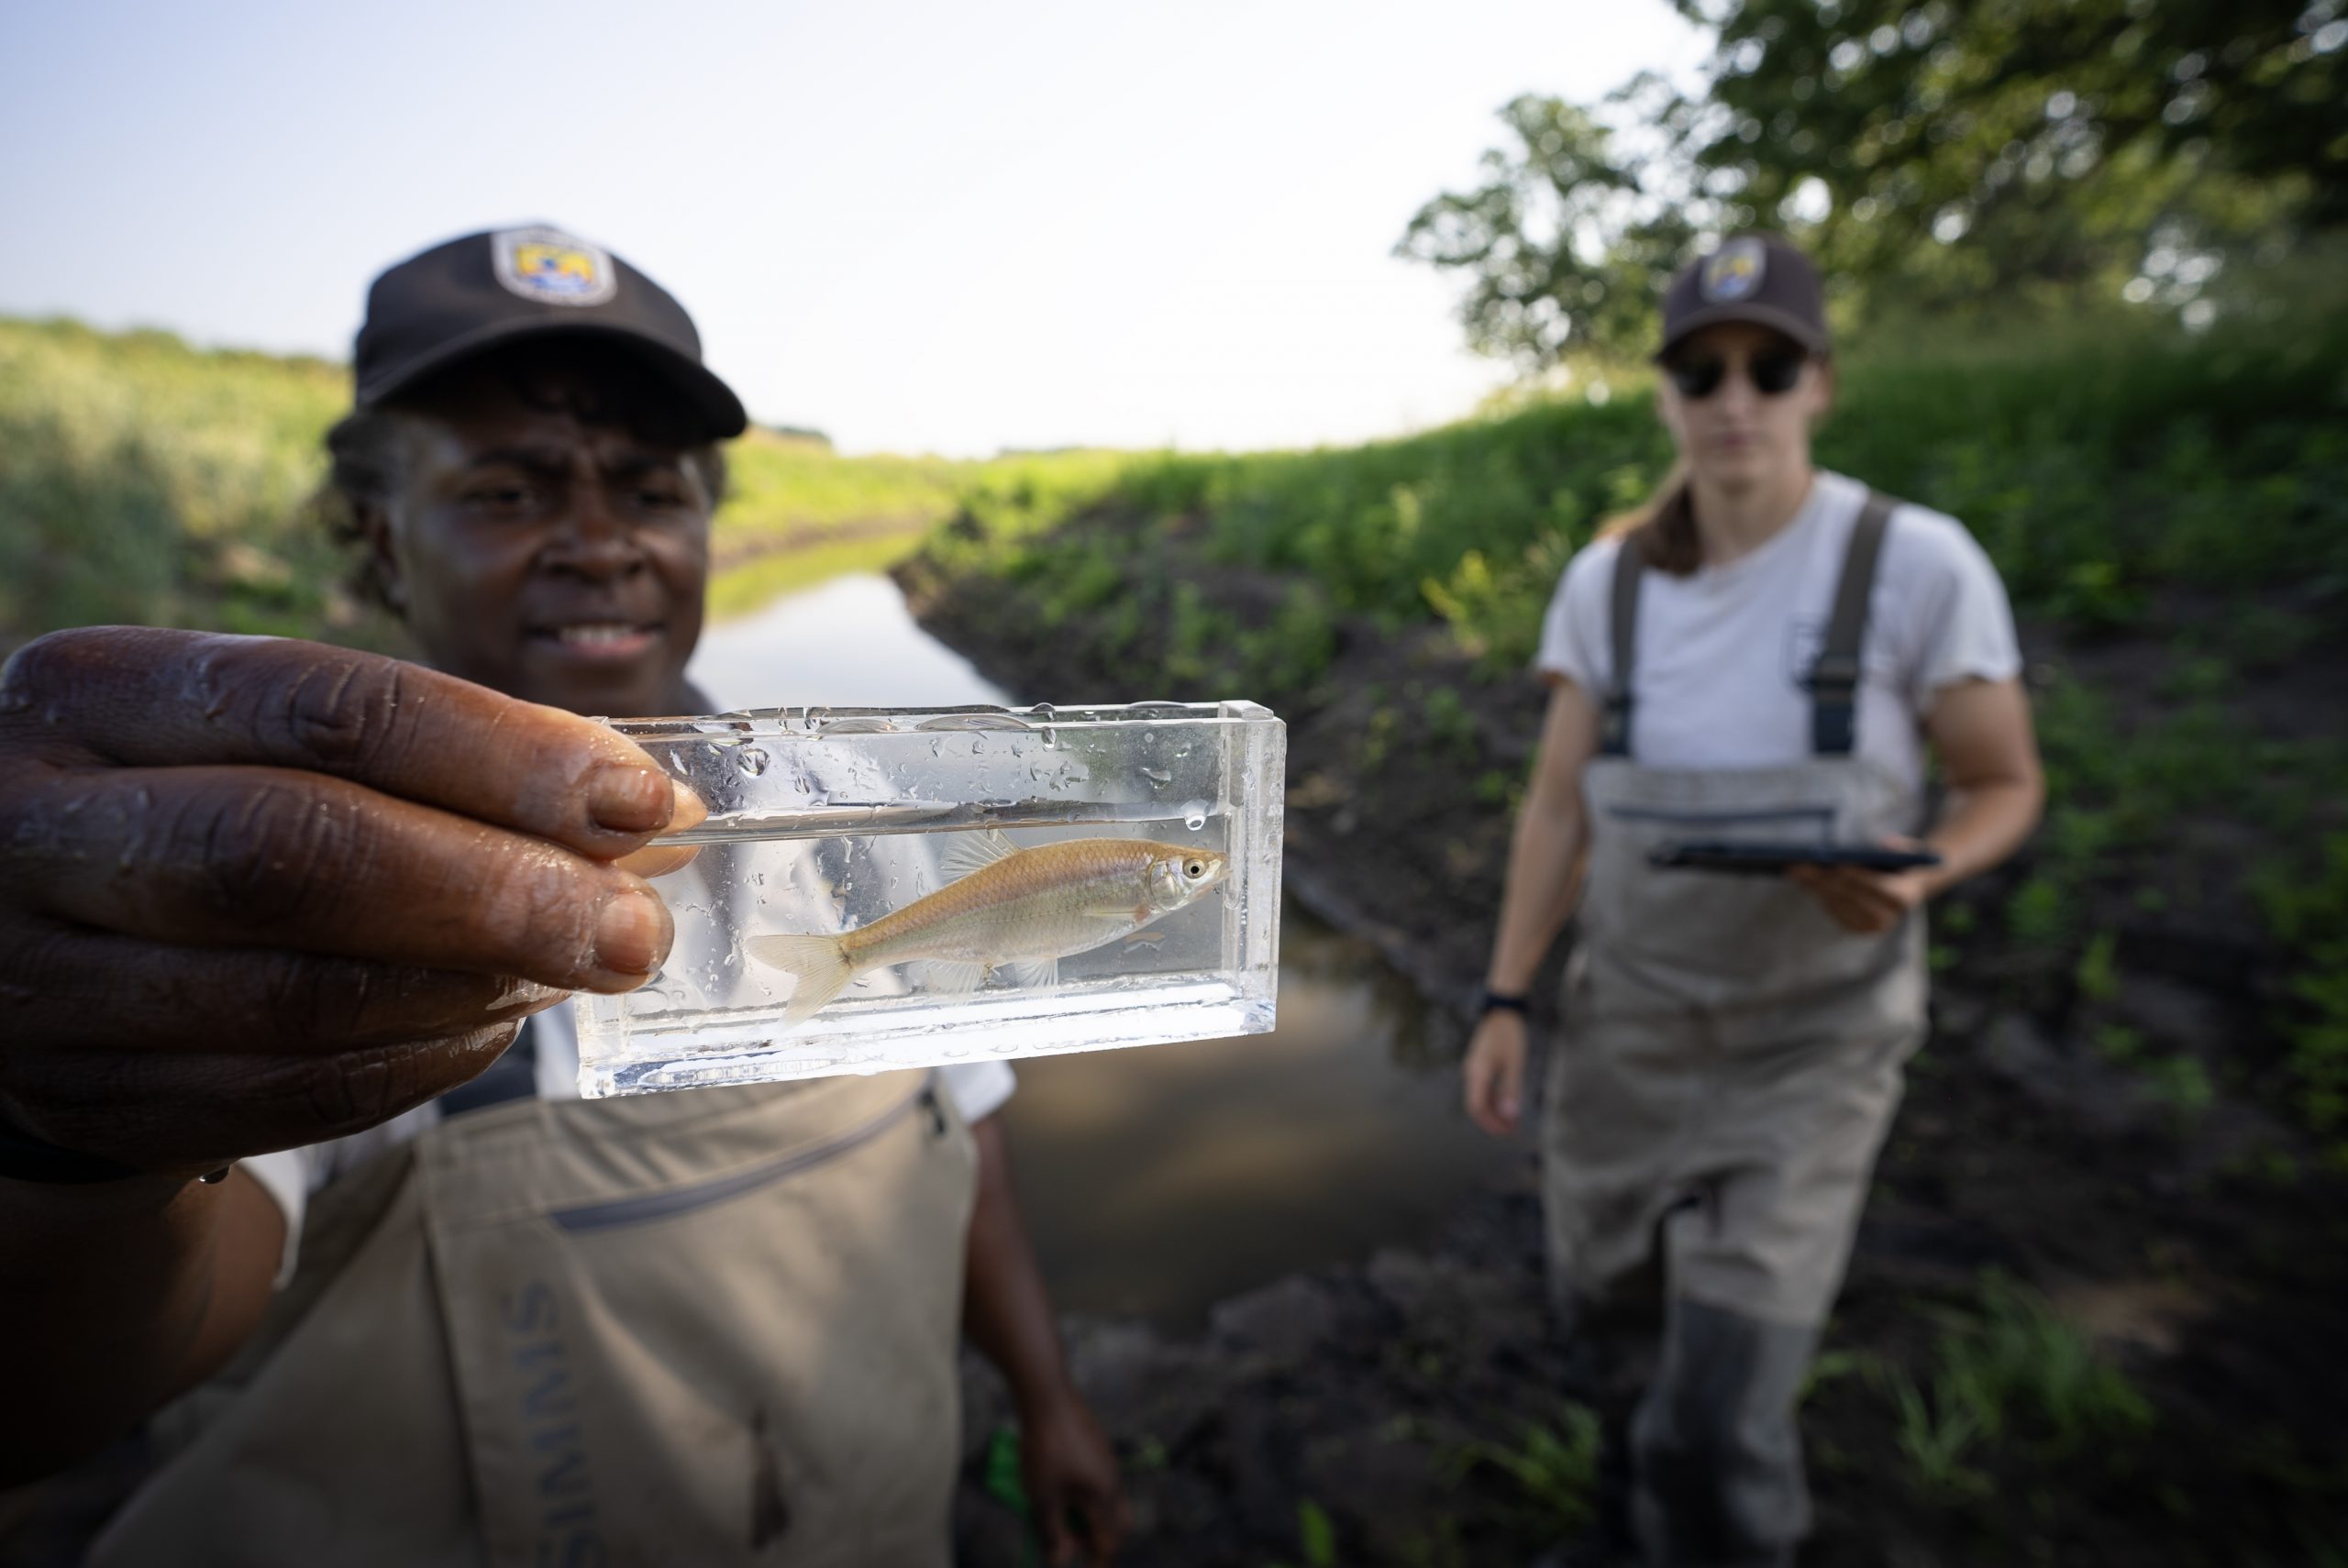 USFWS Biologist displays a spotfin shiner found during sampling of oxbow restoration site in Iowa.